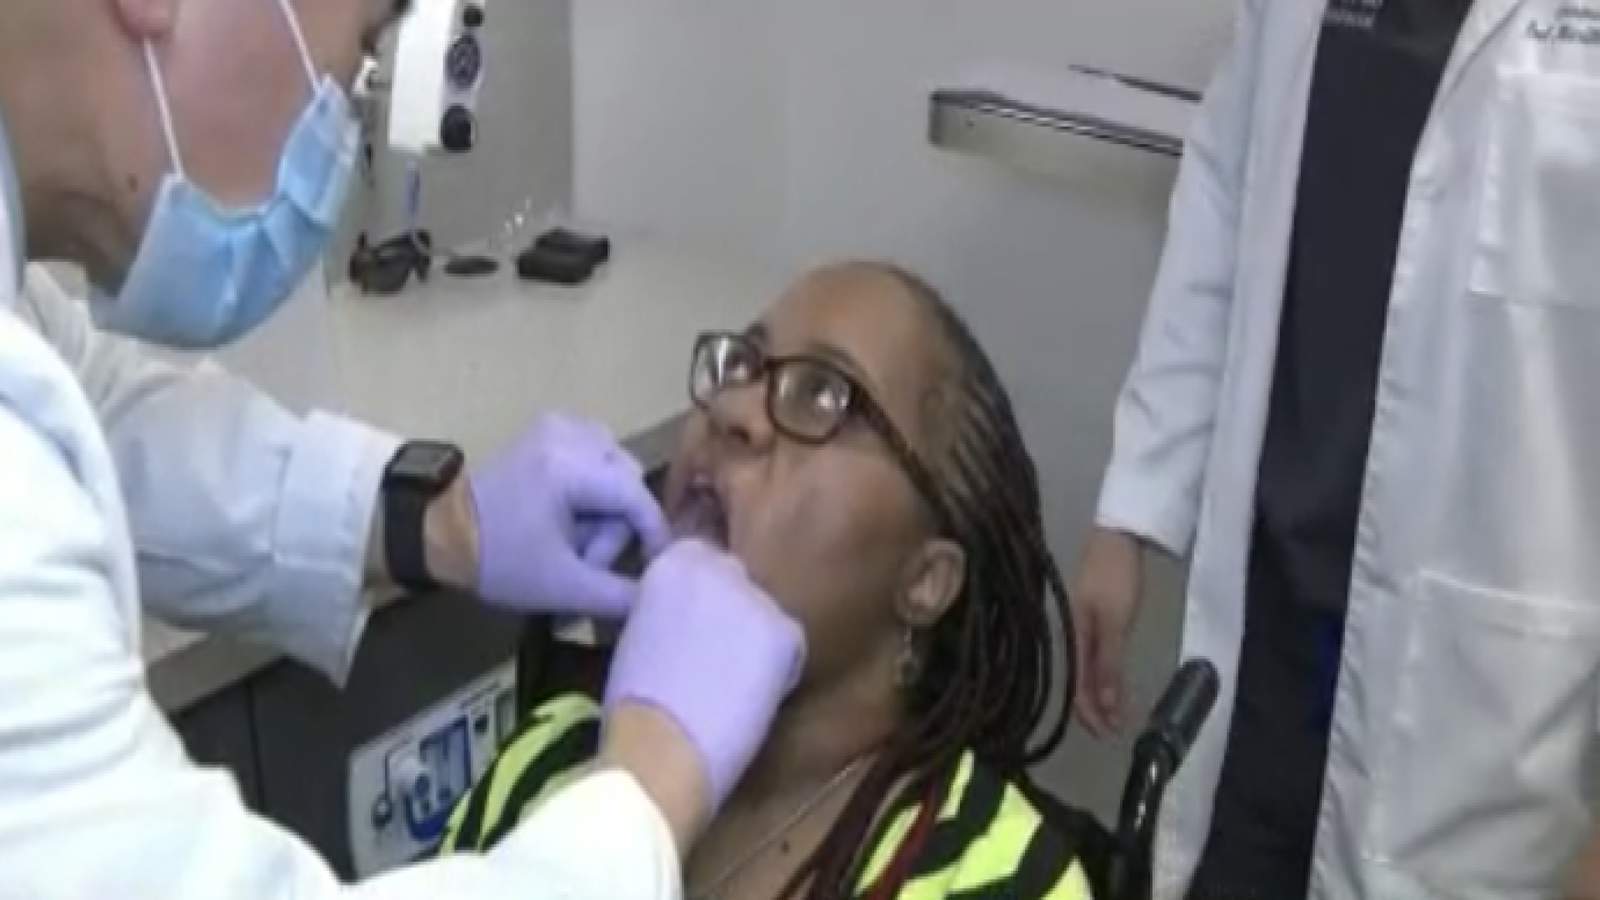 Local doctors study rare tongue disorder disproportionately affecting Black people